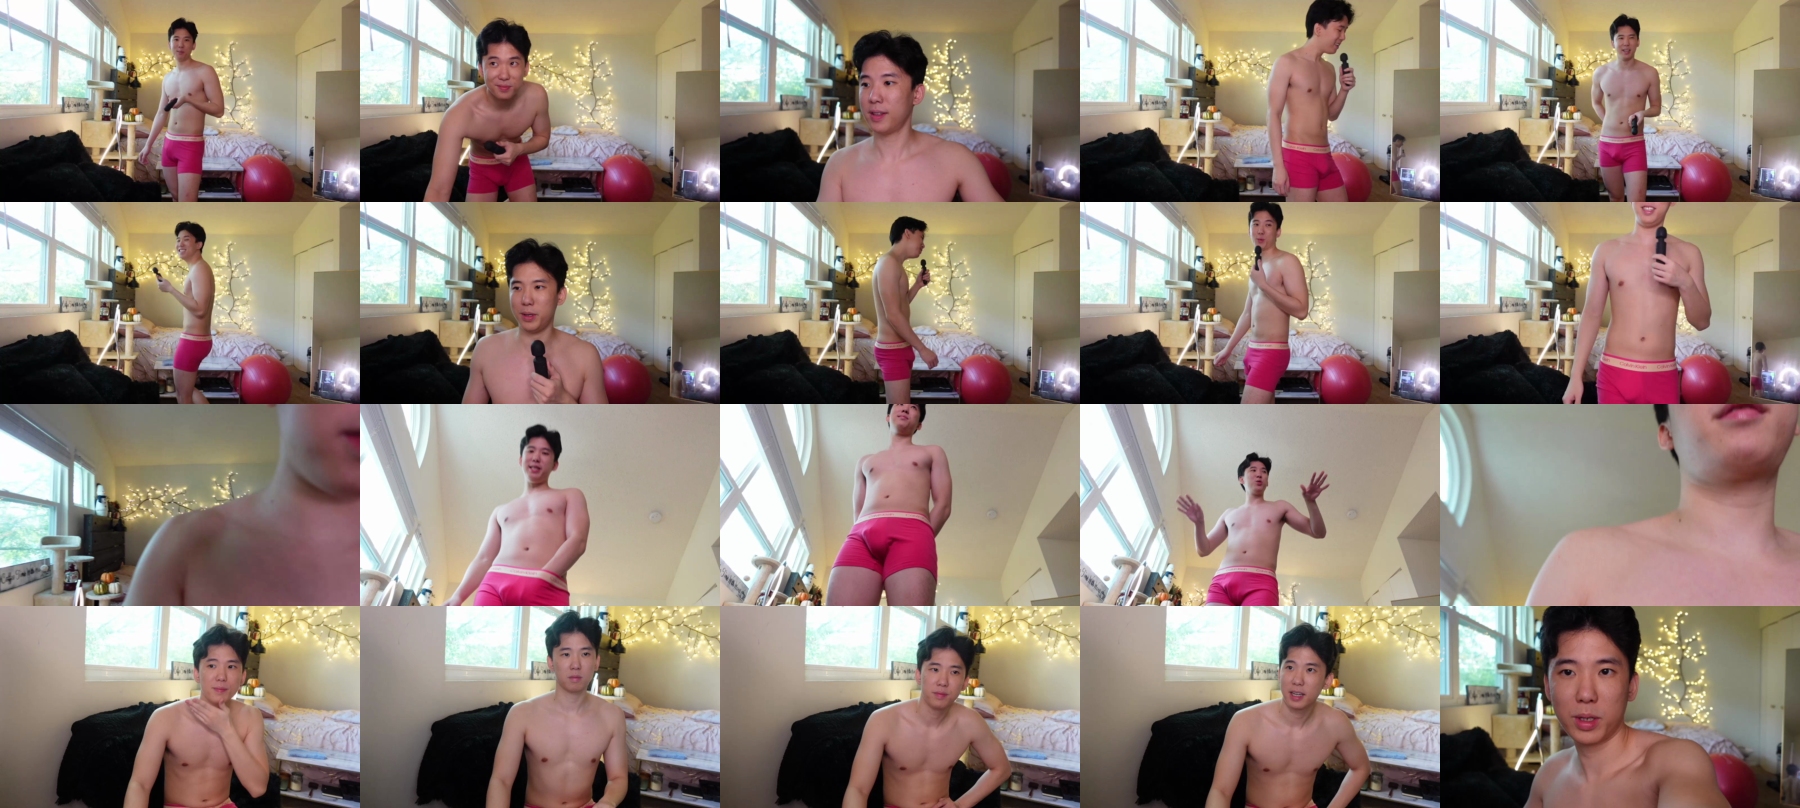 Yungricewang  16-10-2021 Male Topless